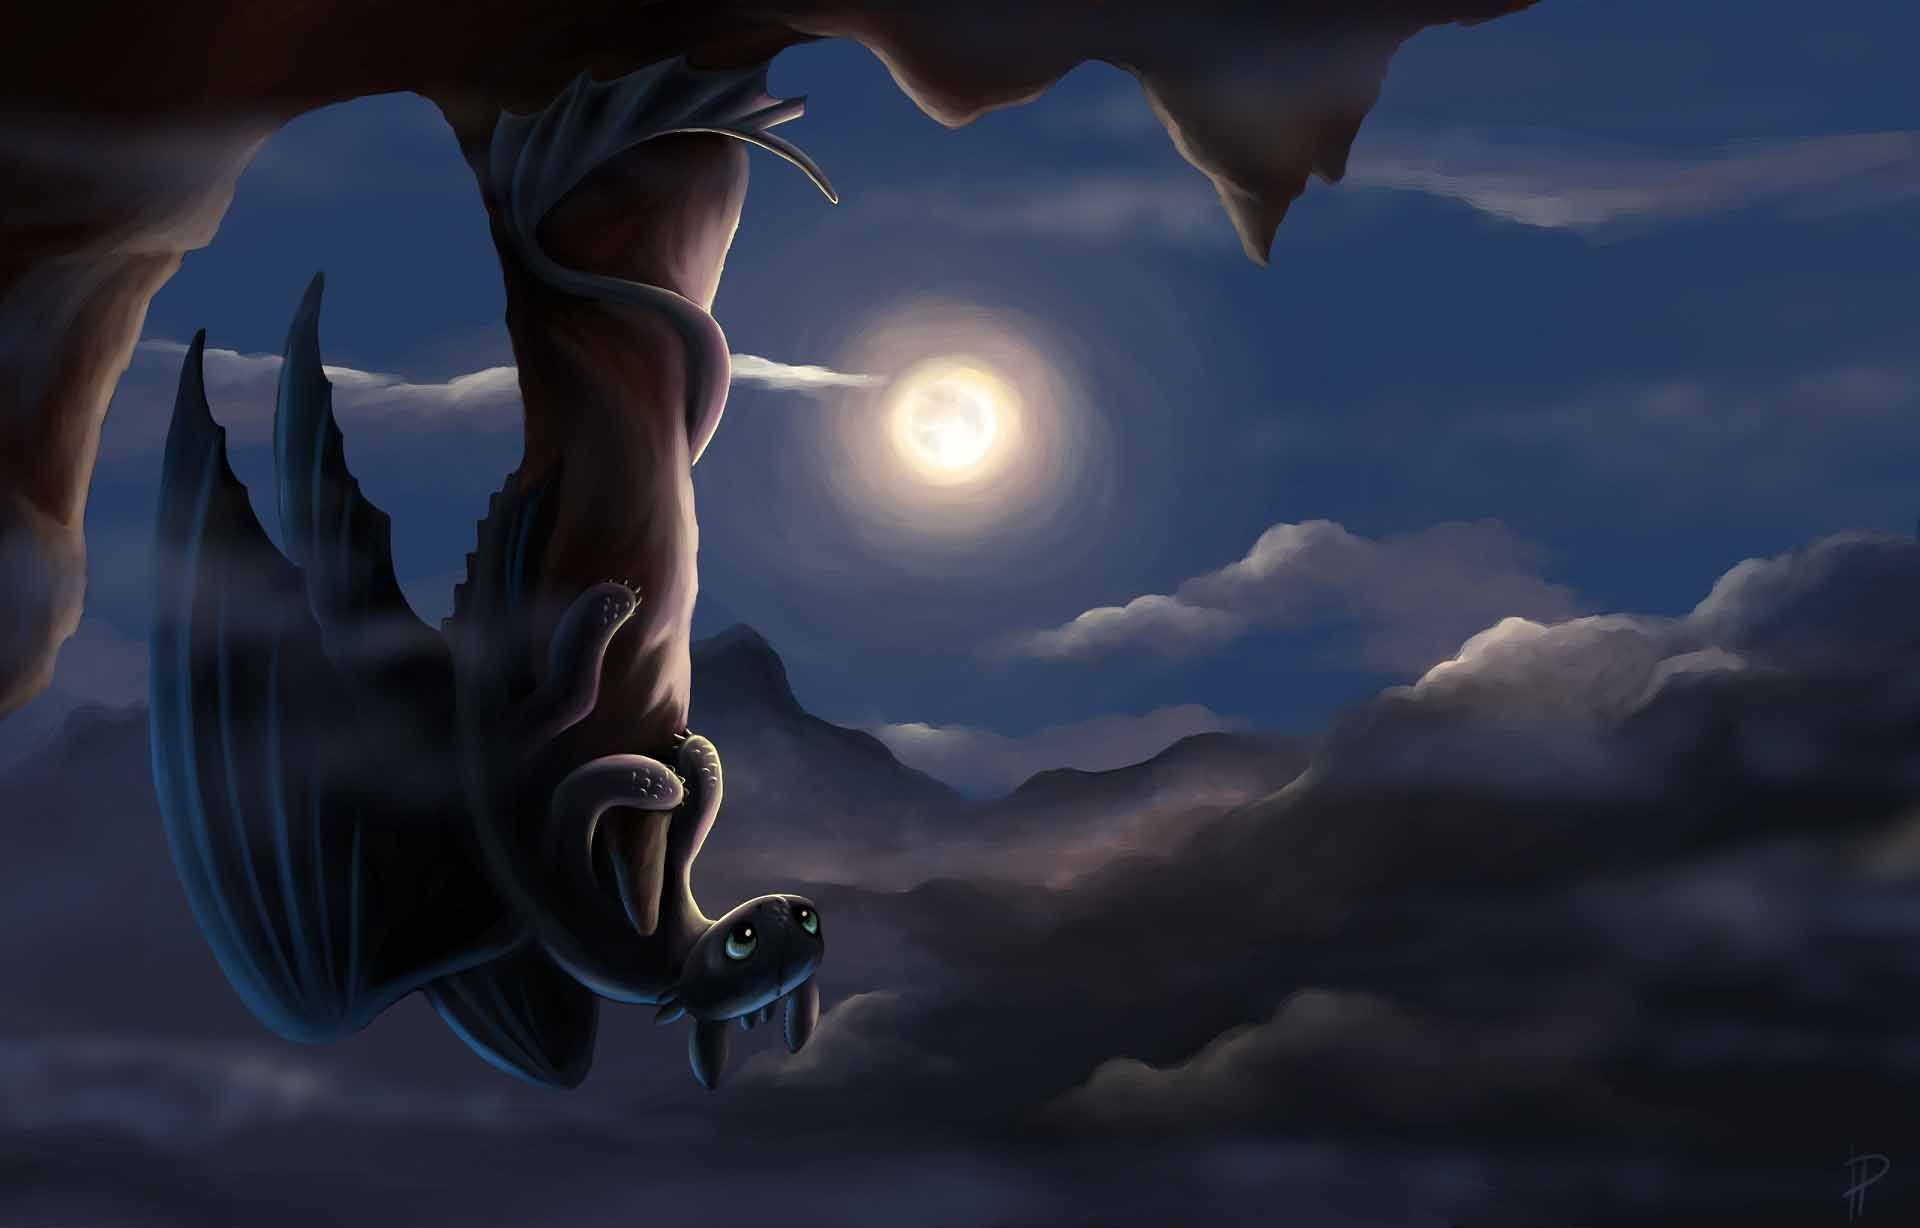 How to Train Your Dragon - Night Fury artwork - Wallpaper